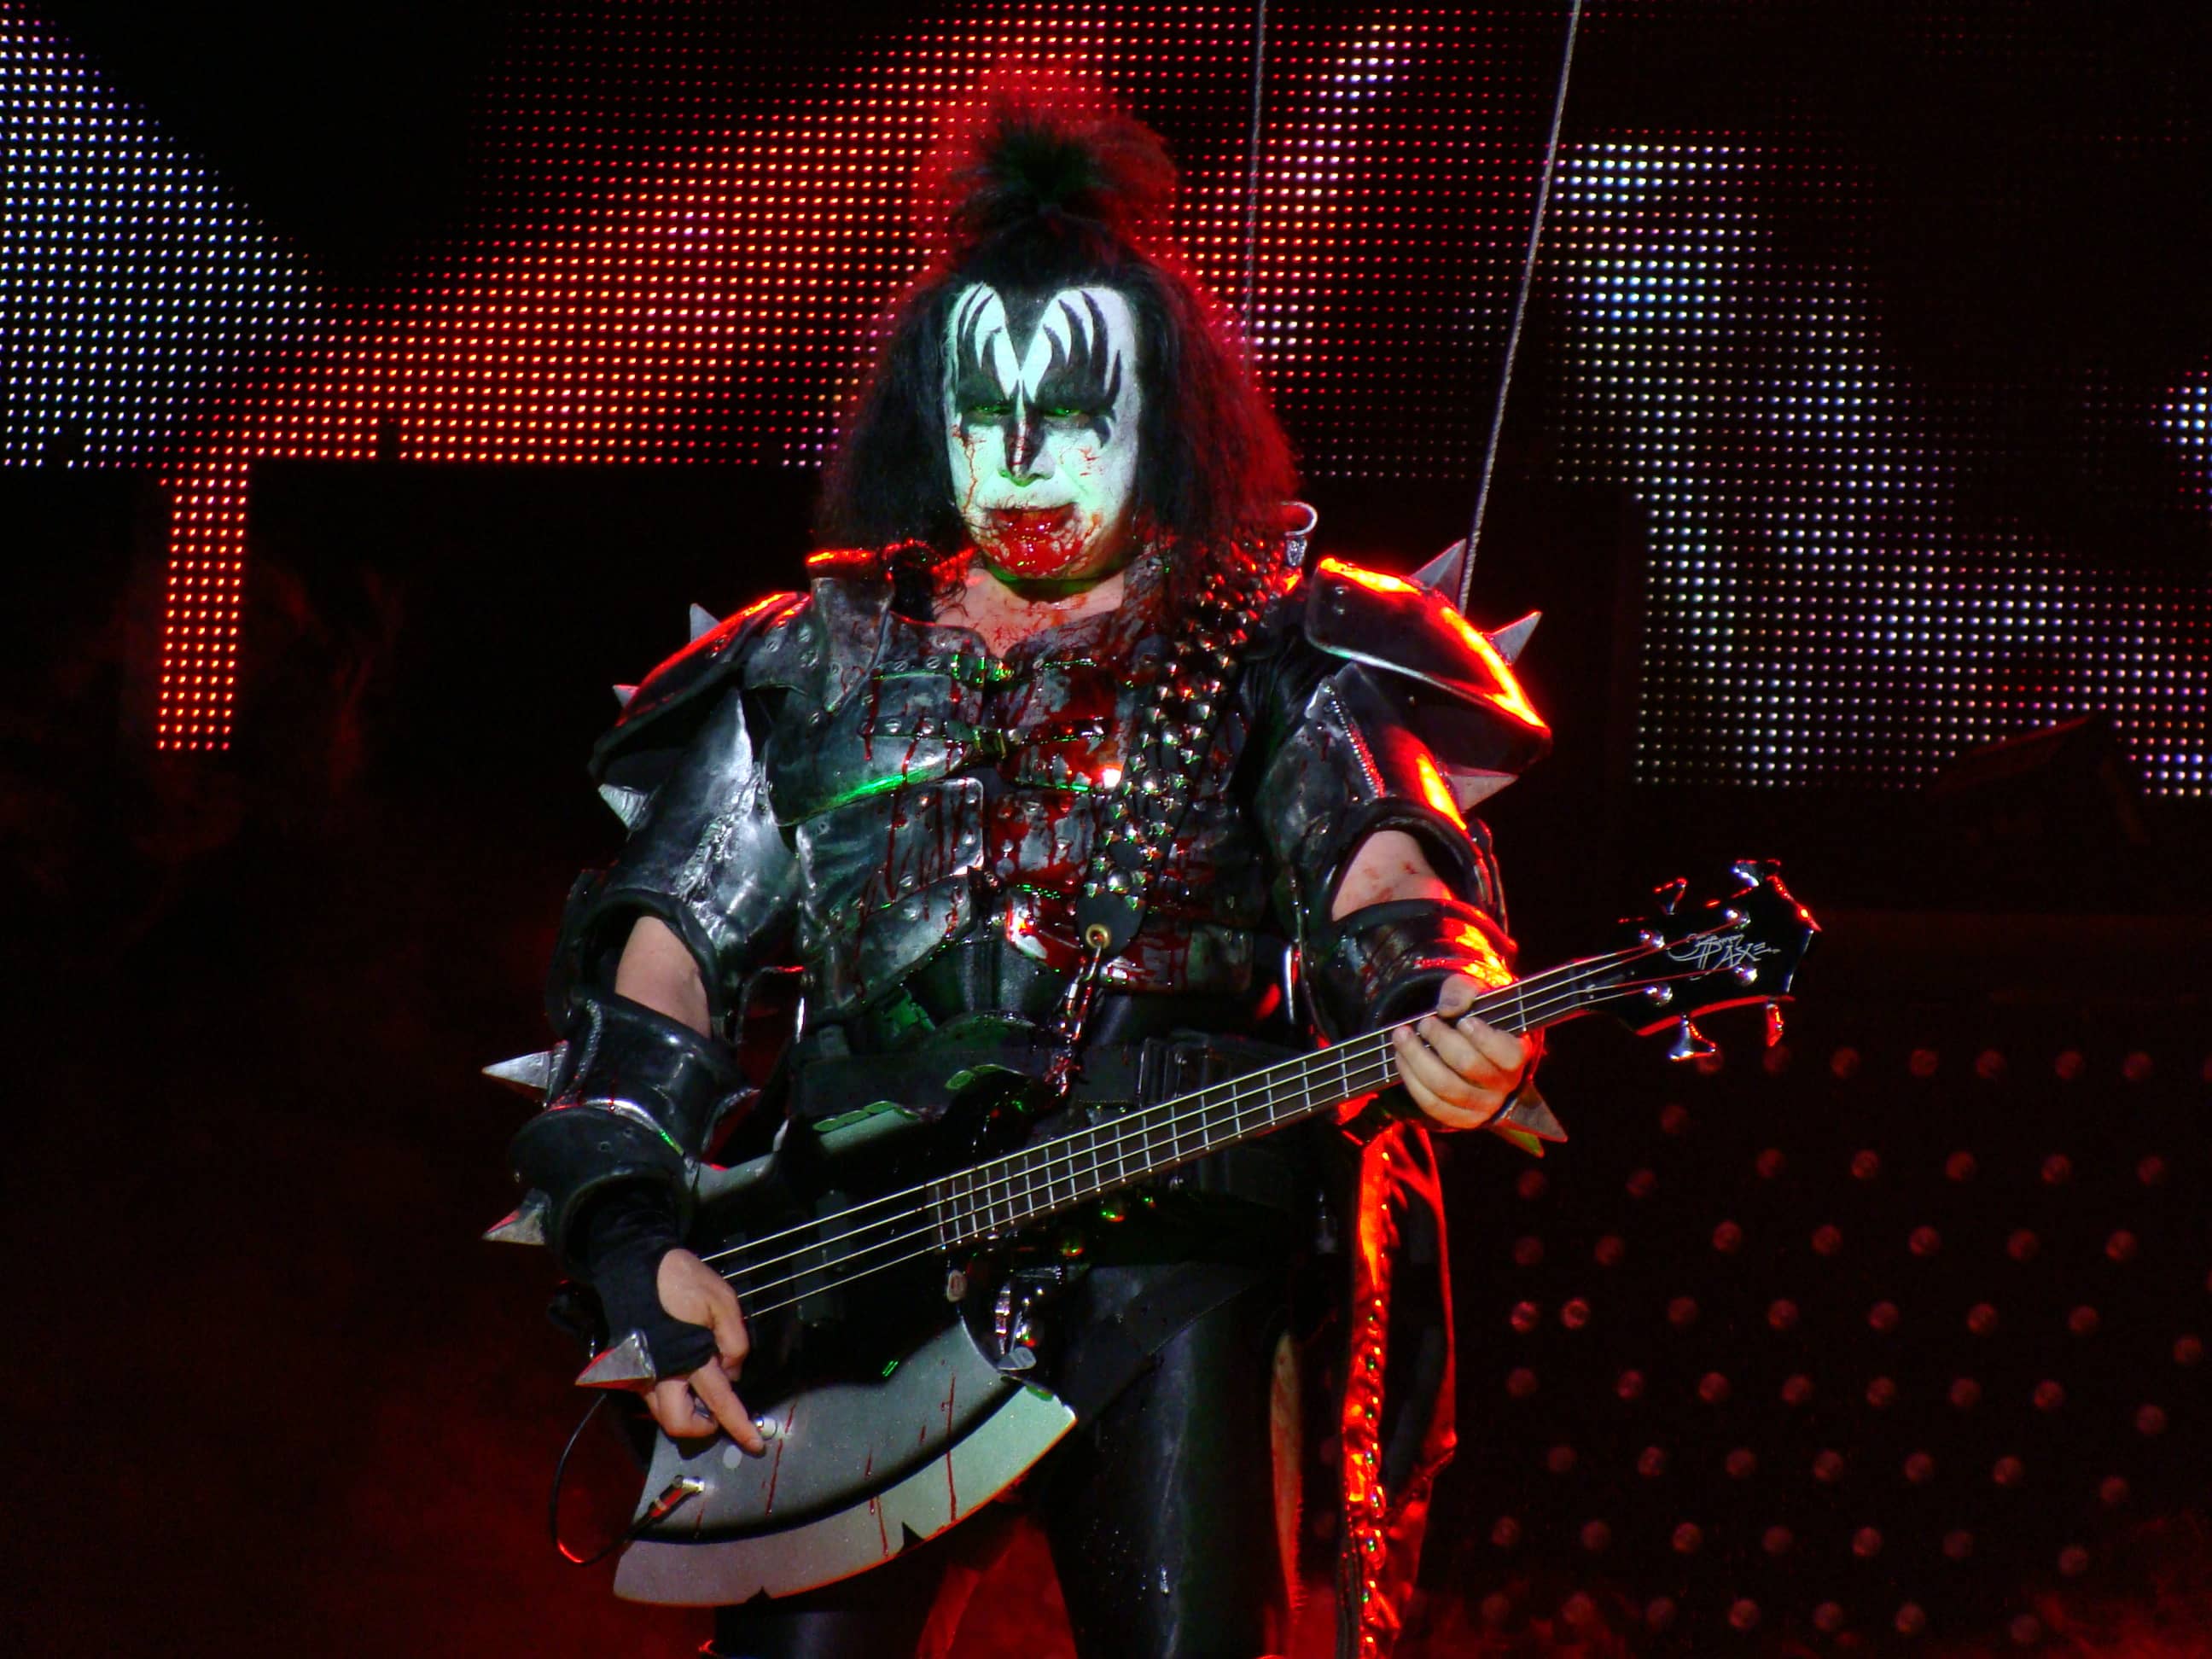 Von Alberto Cabello from Vitoria Gasteiz - Gene Simmons (KISS), CC BY 2.0, https://commons.wikimedia.org/w/index.php?curid=11810893